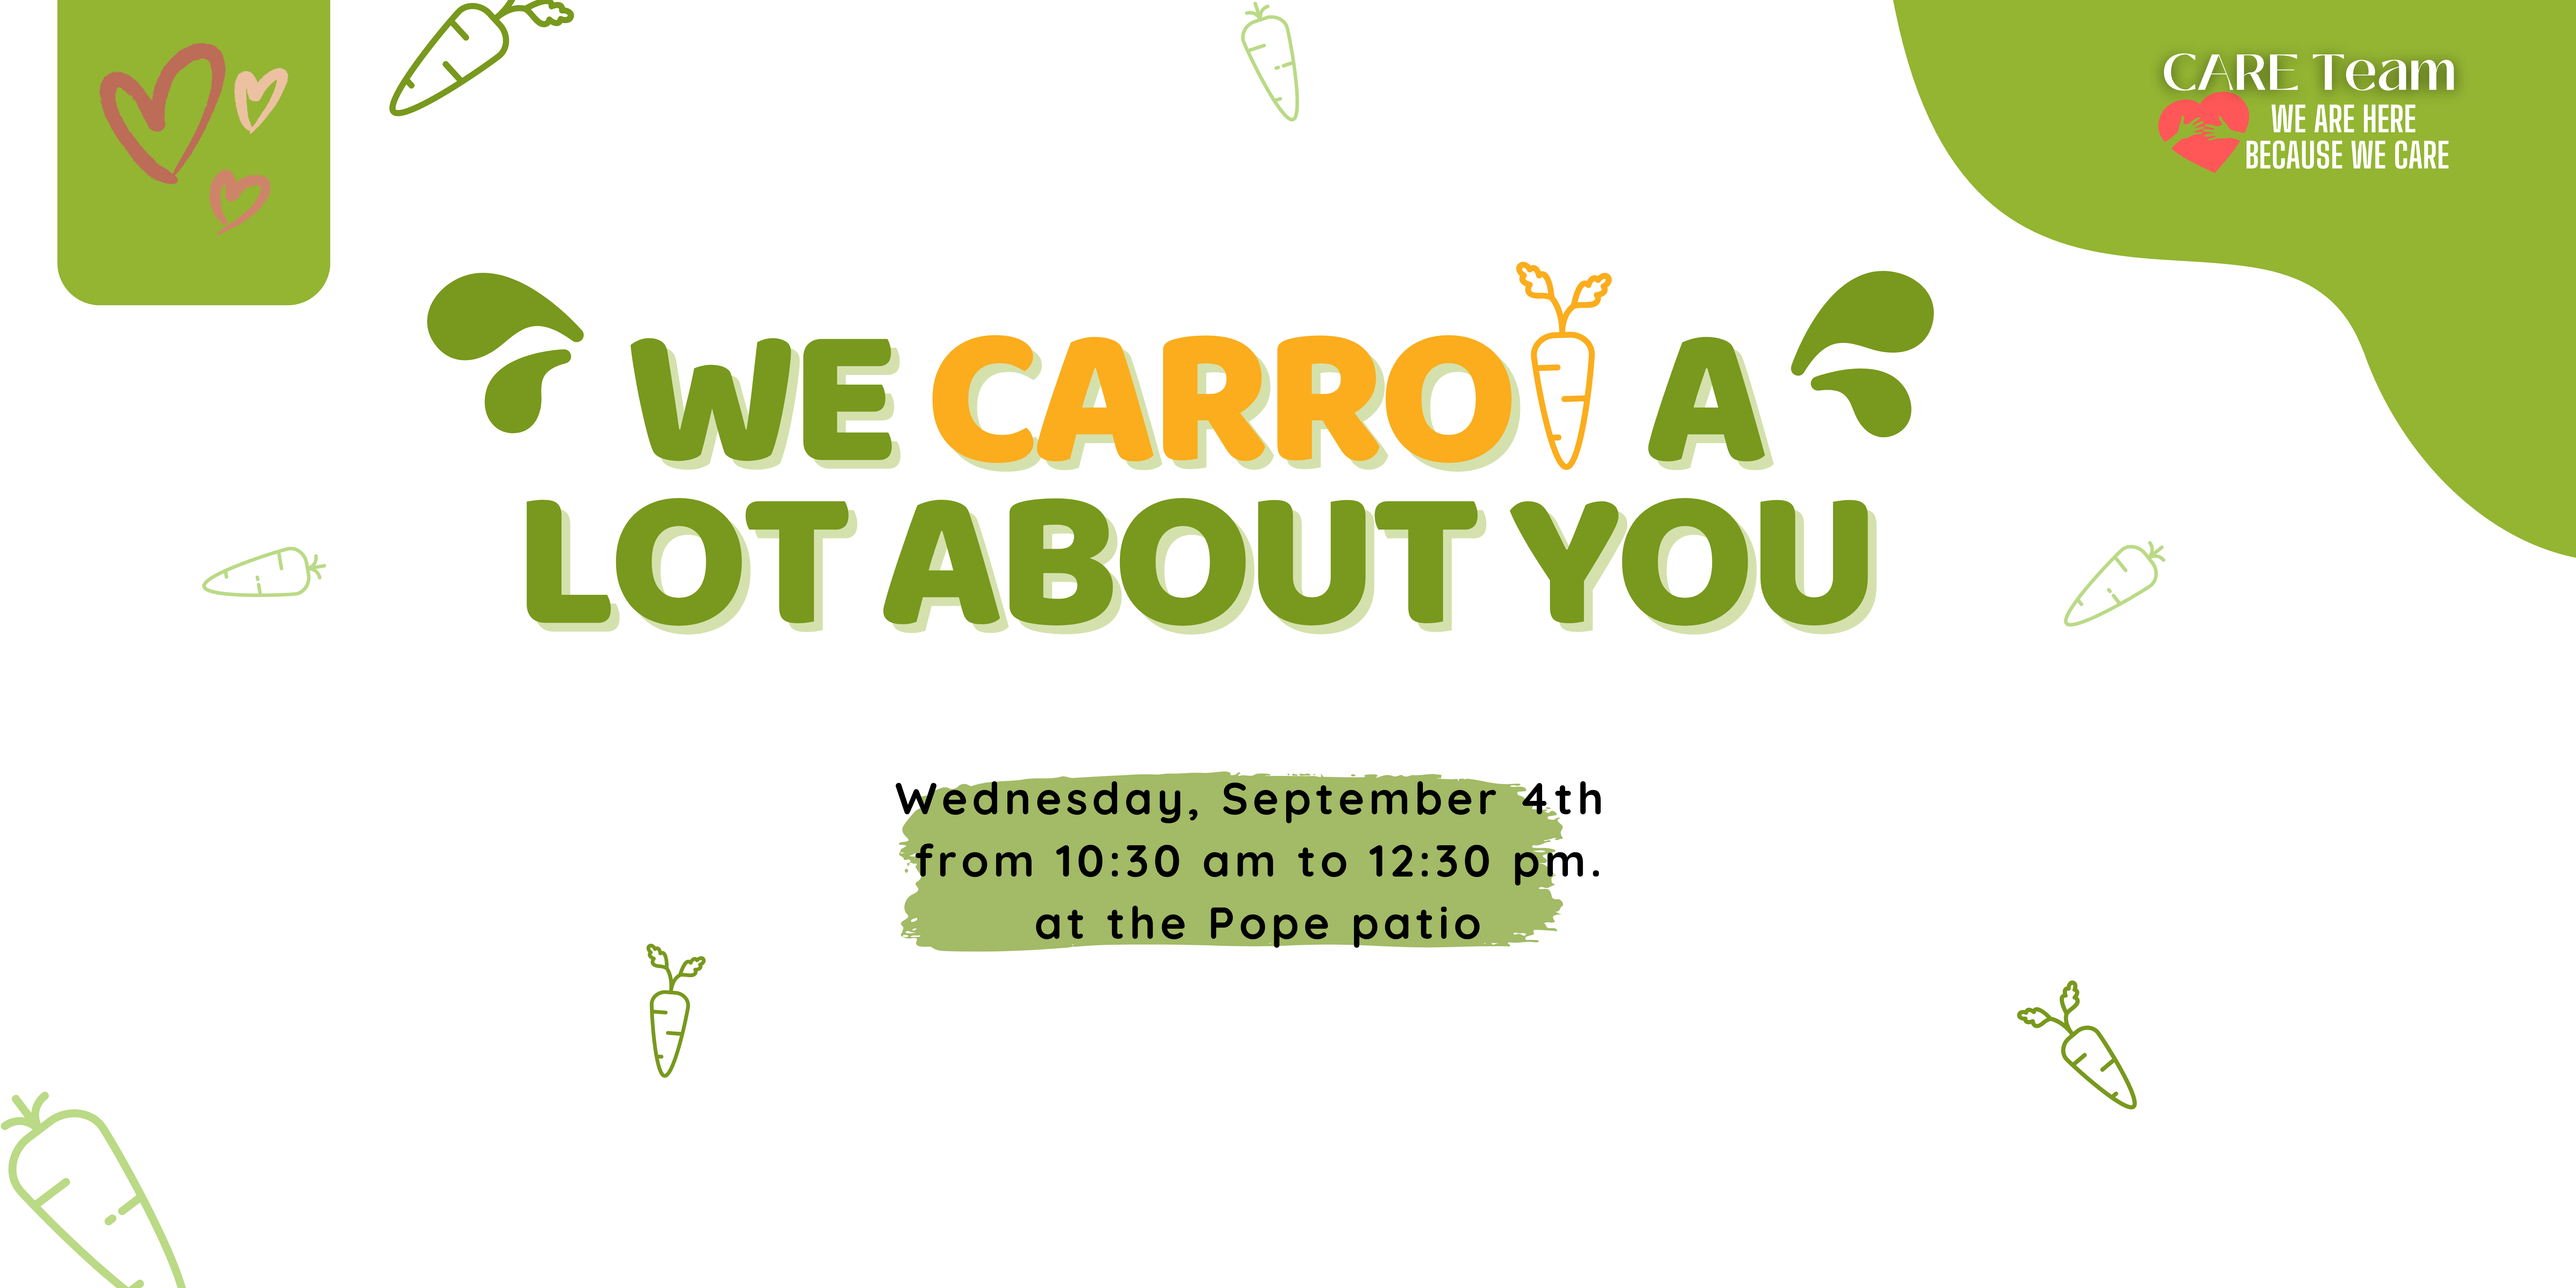 CARE table: We CARROT a lot about you!